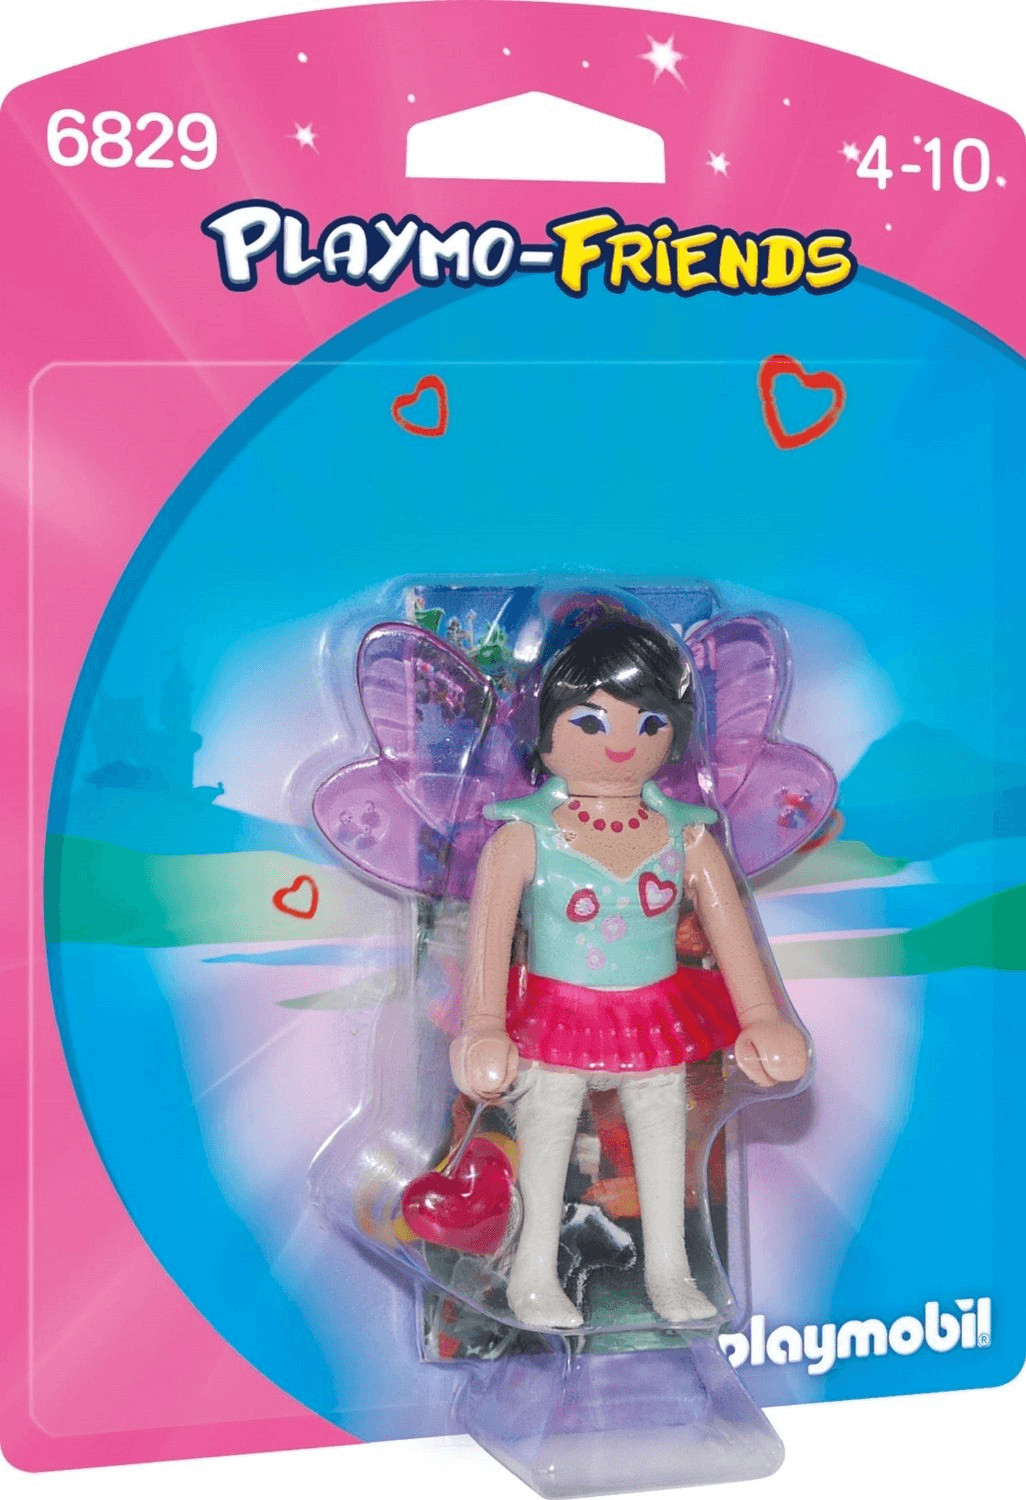 PLAYMOBIL 6829 Playmo-Friends - Gute Fee mit Ring